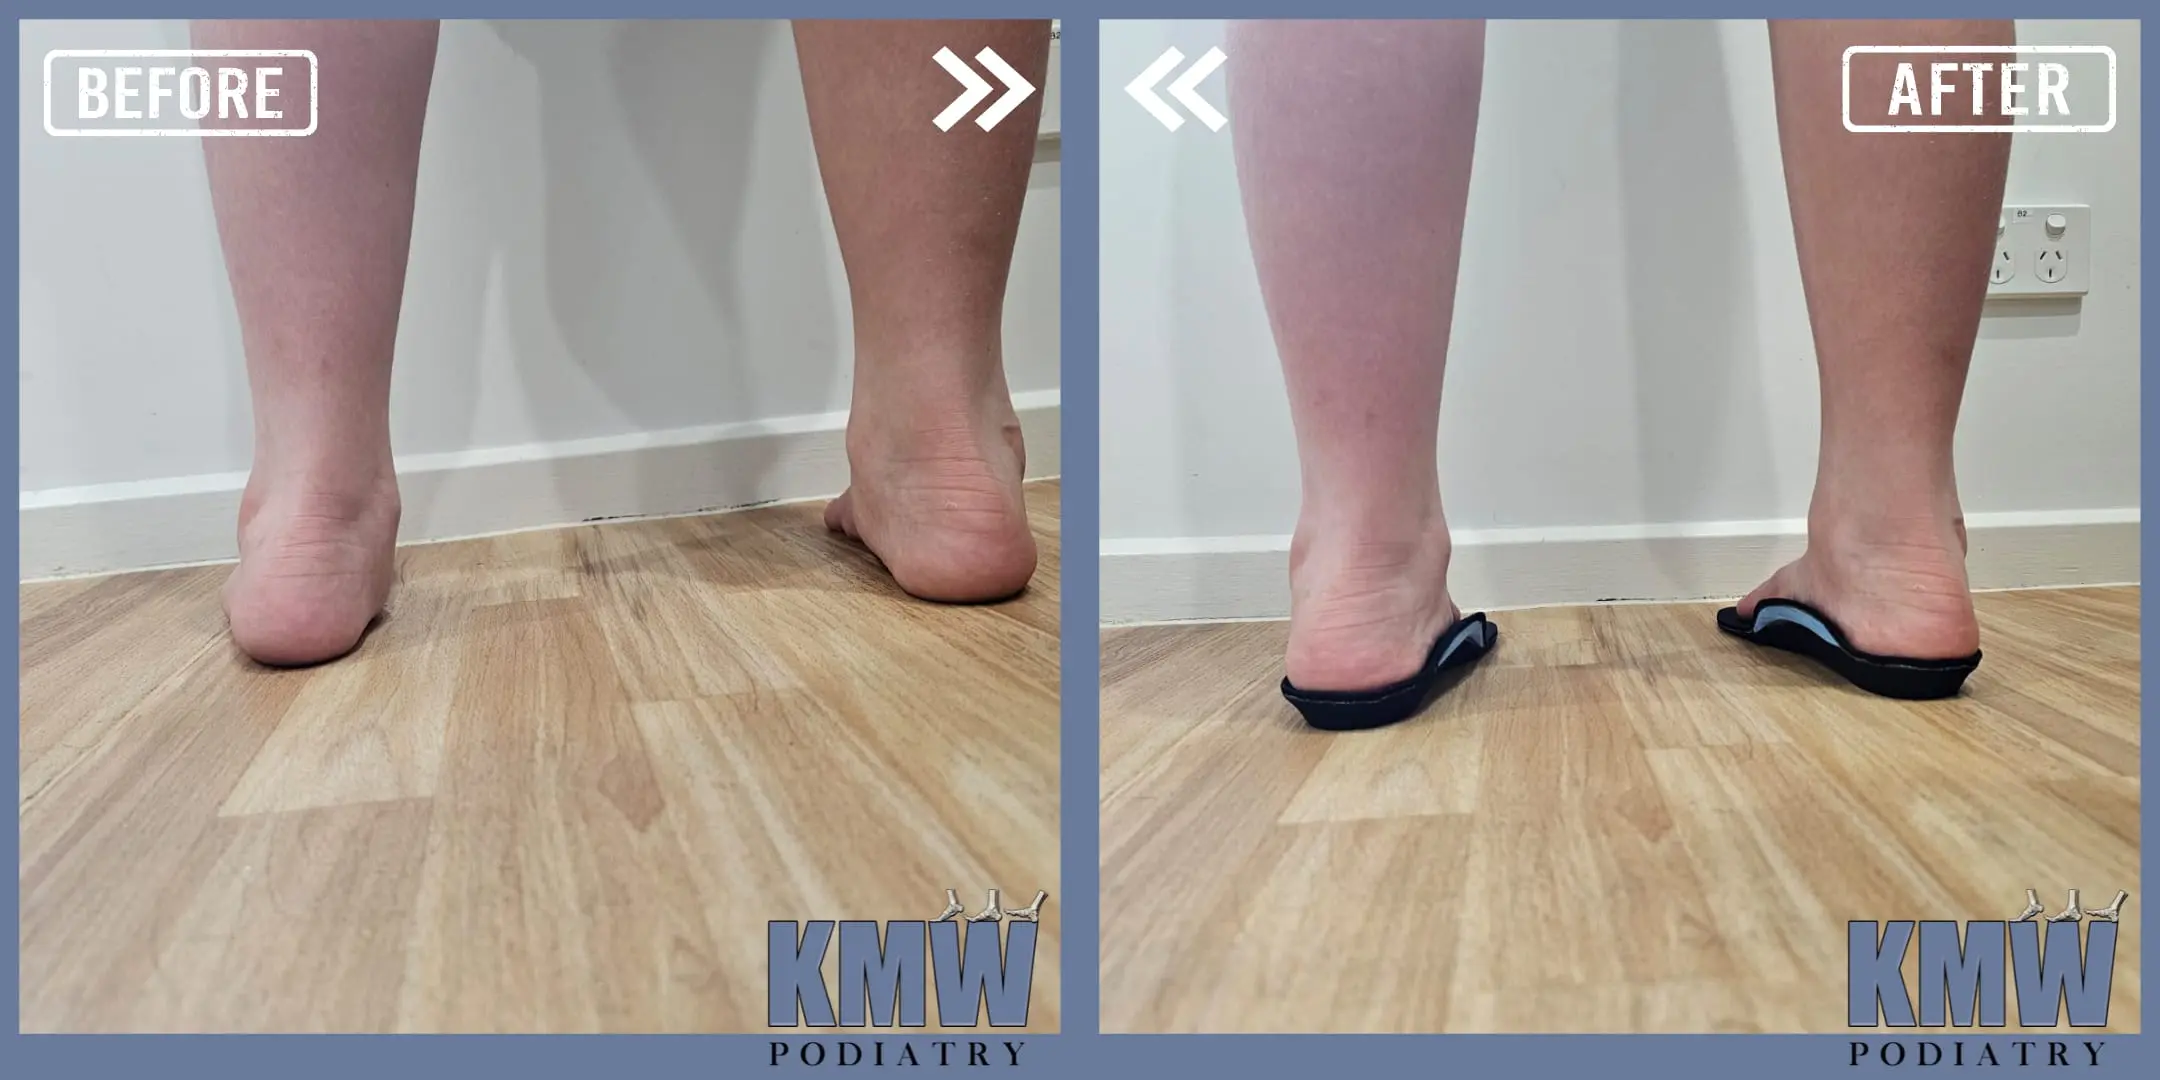 Before and After KMW Podiatry Treatments